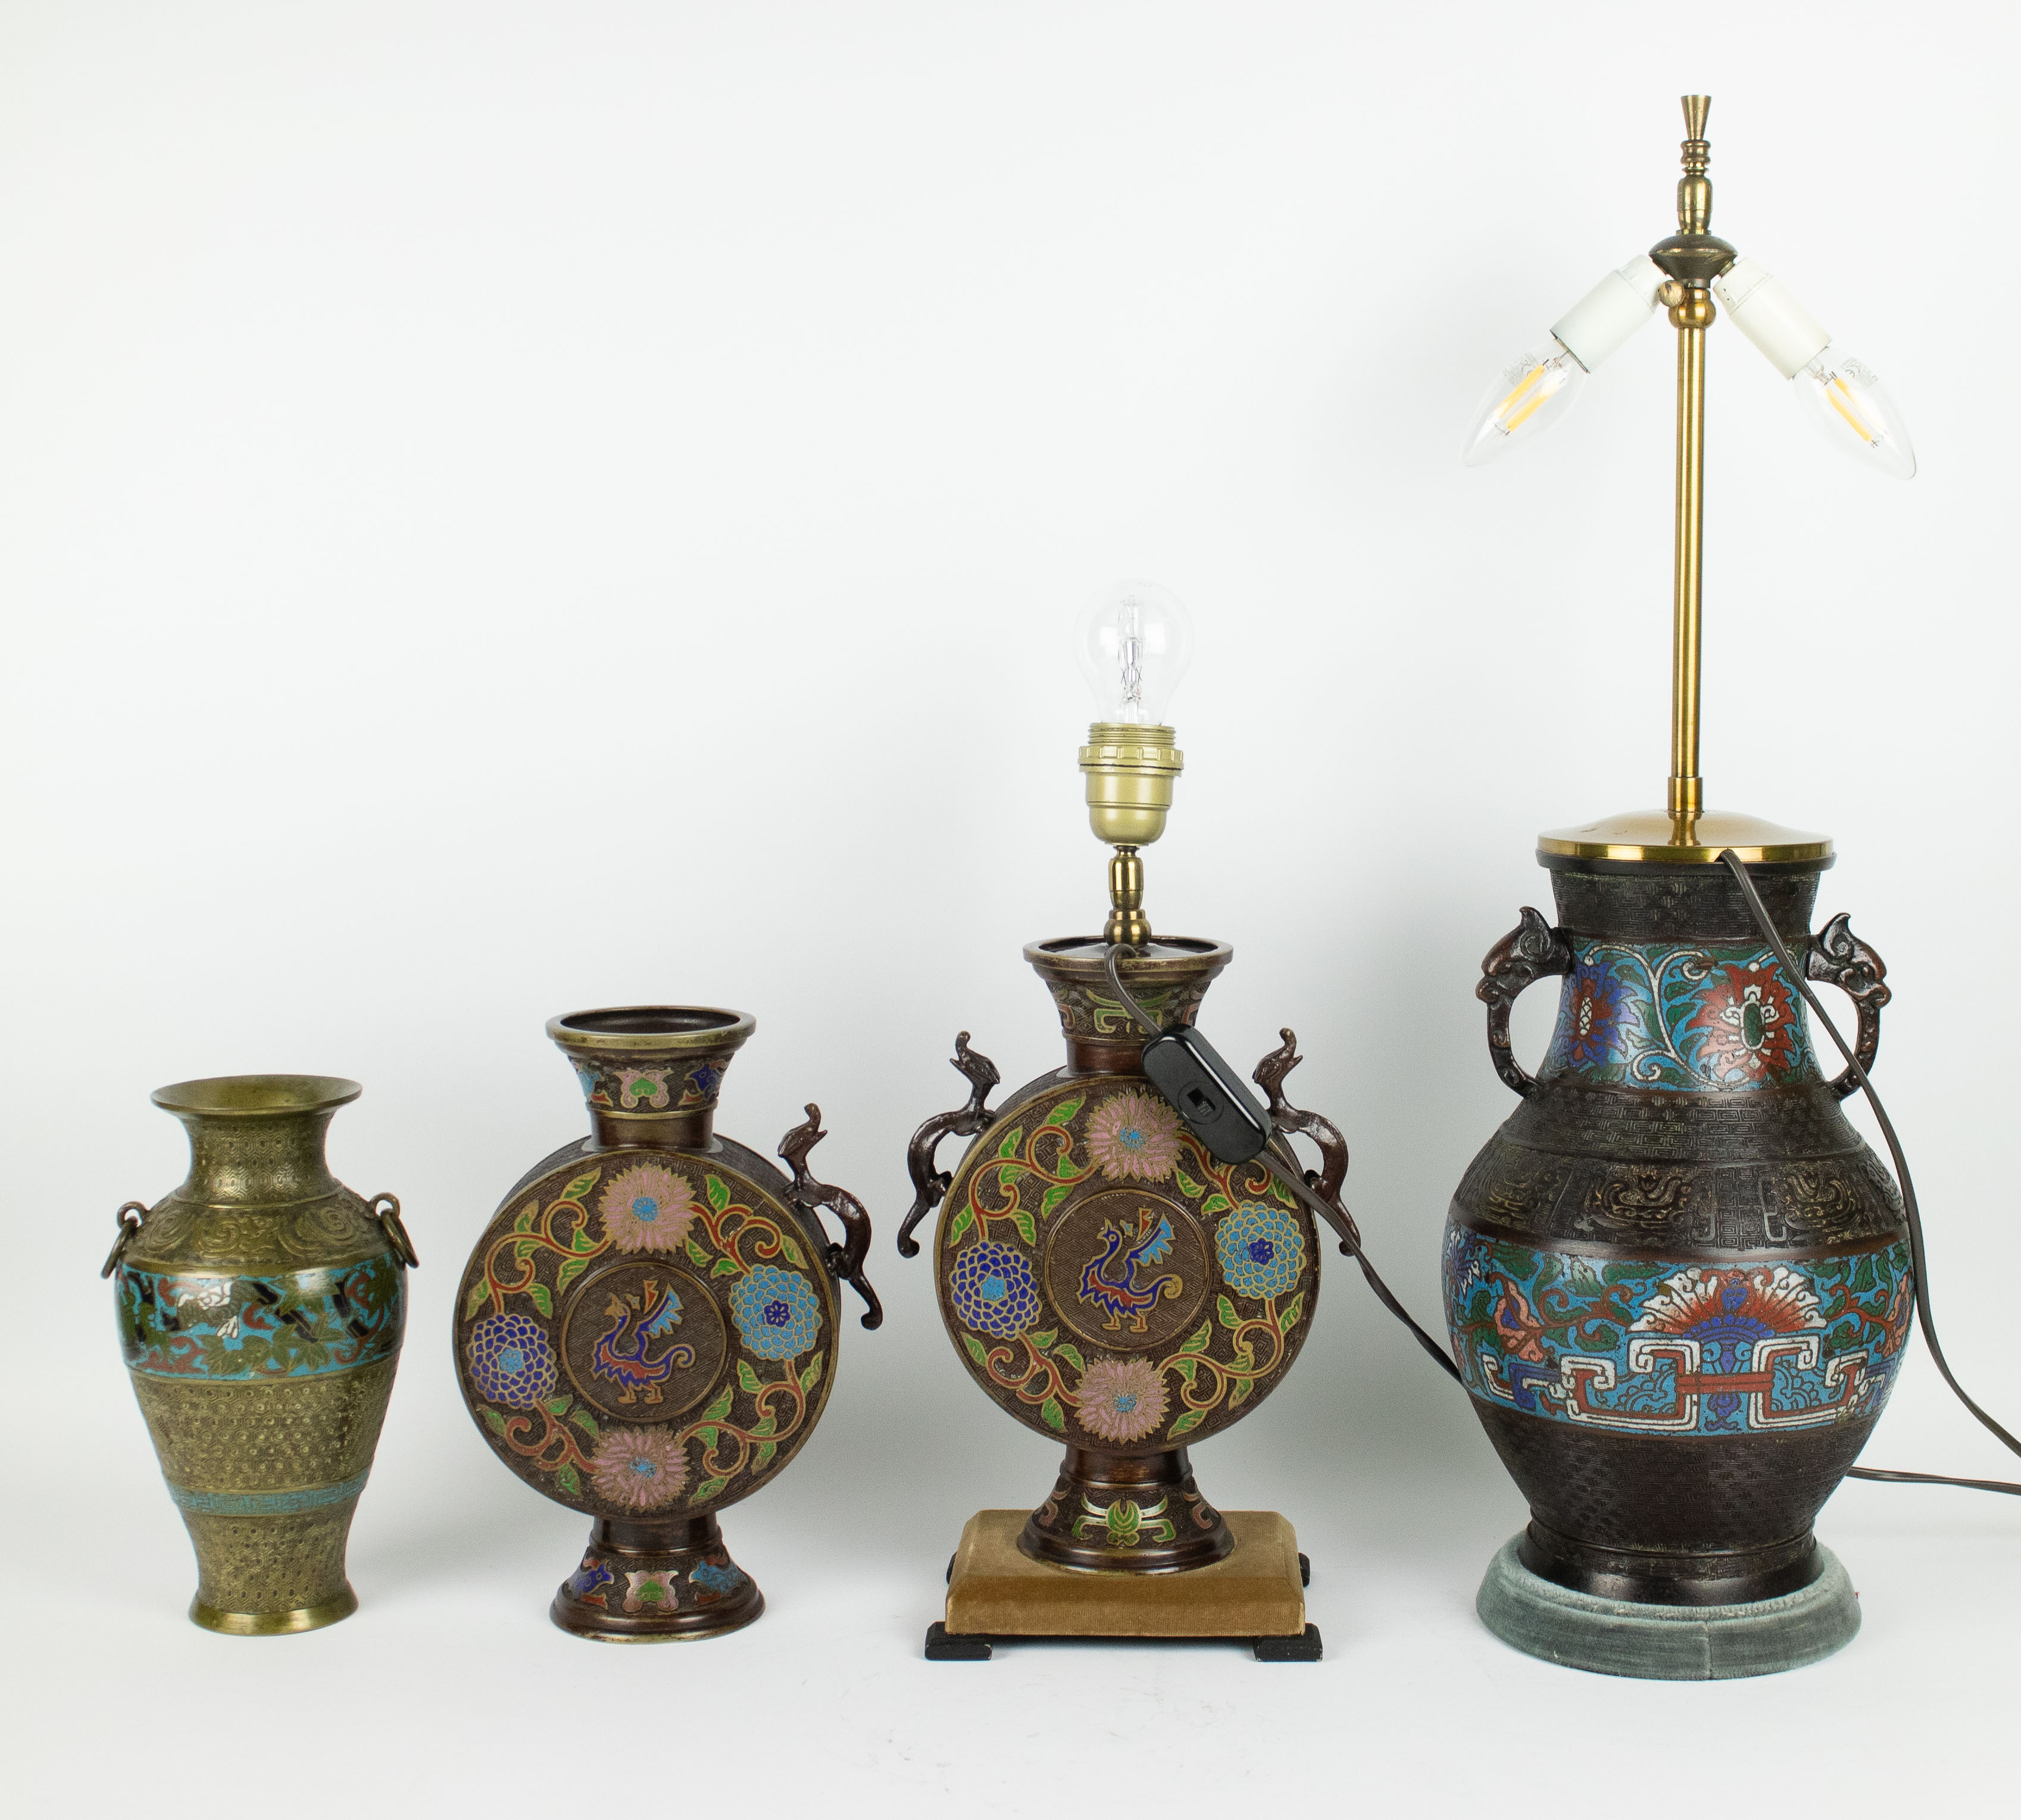 2 Japanese champlevé lamps and 2 vases - Image 3 of 4